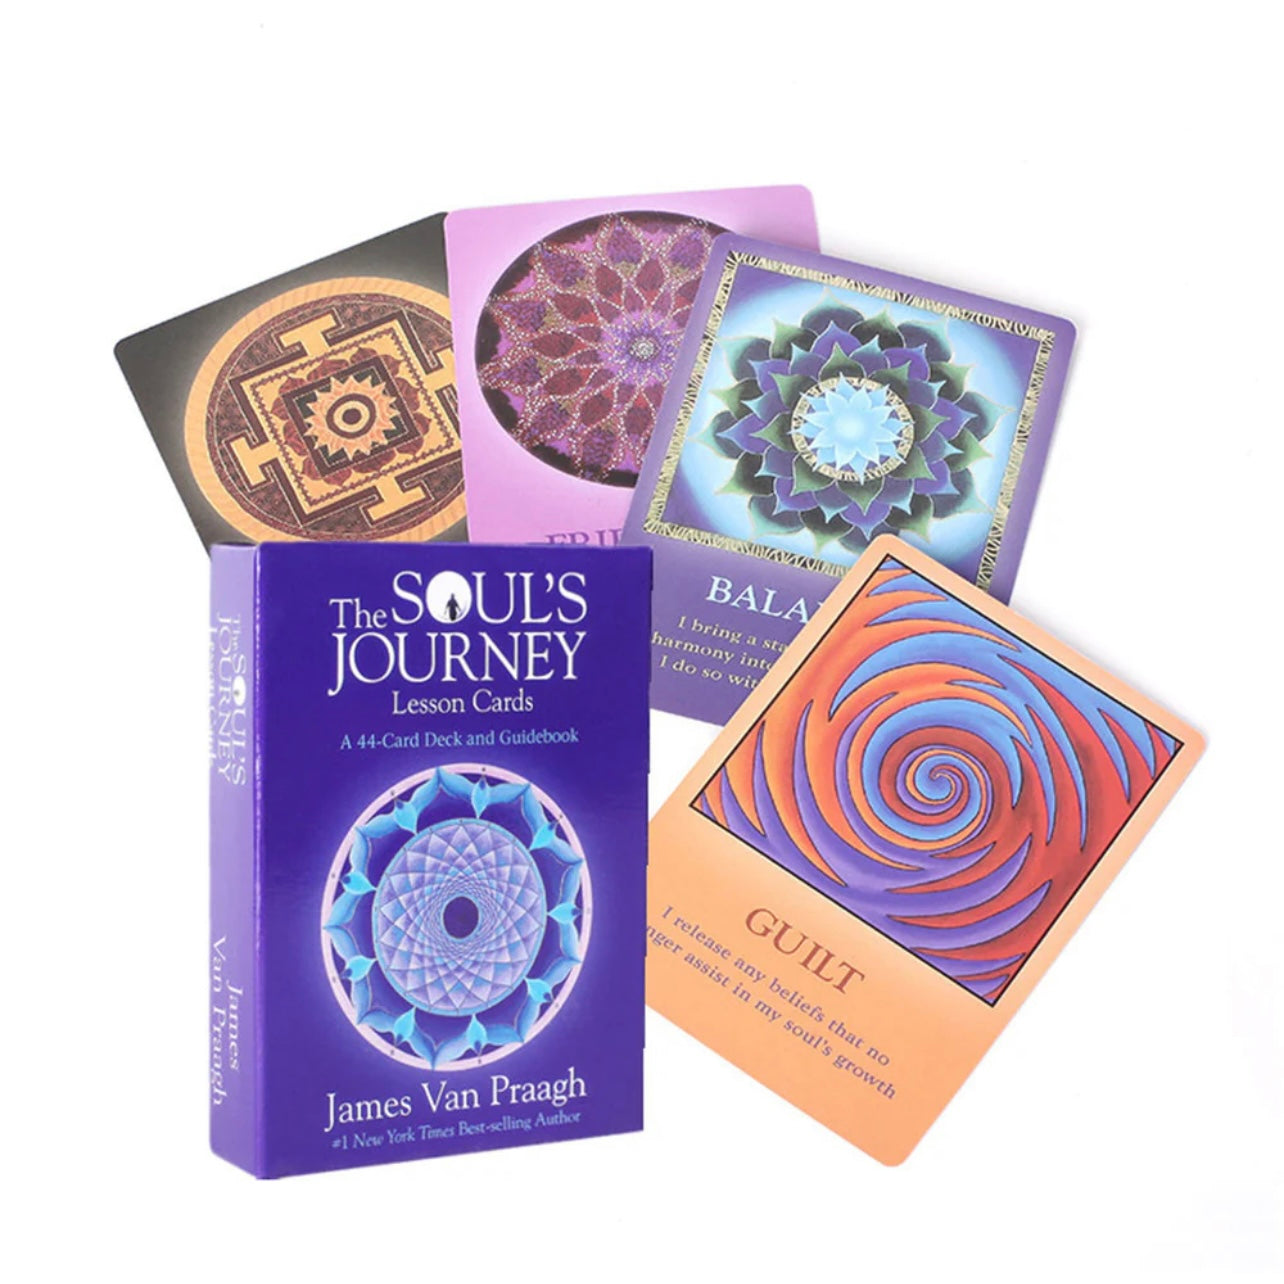 The Soul’s Journey Lesson Cards